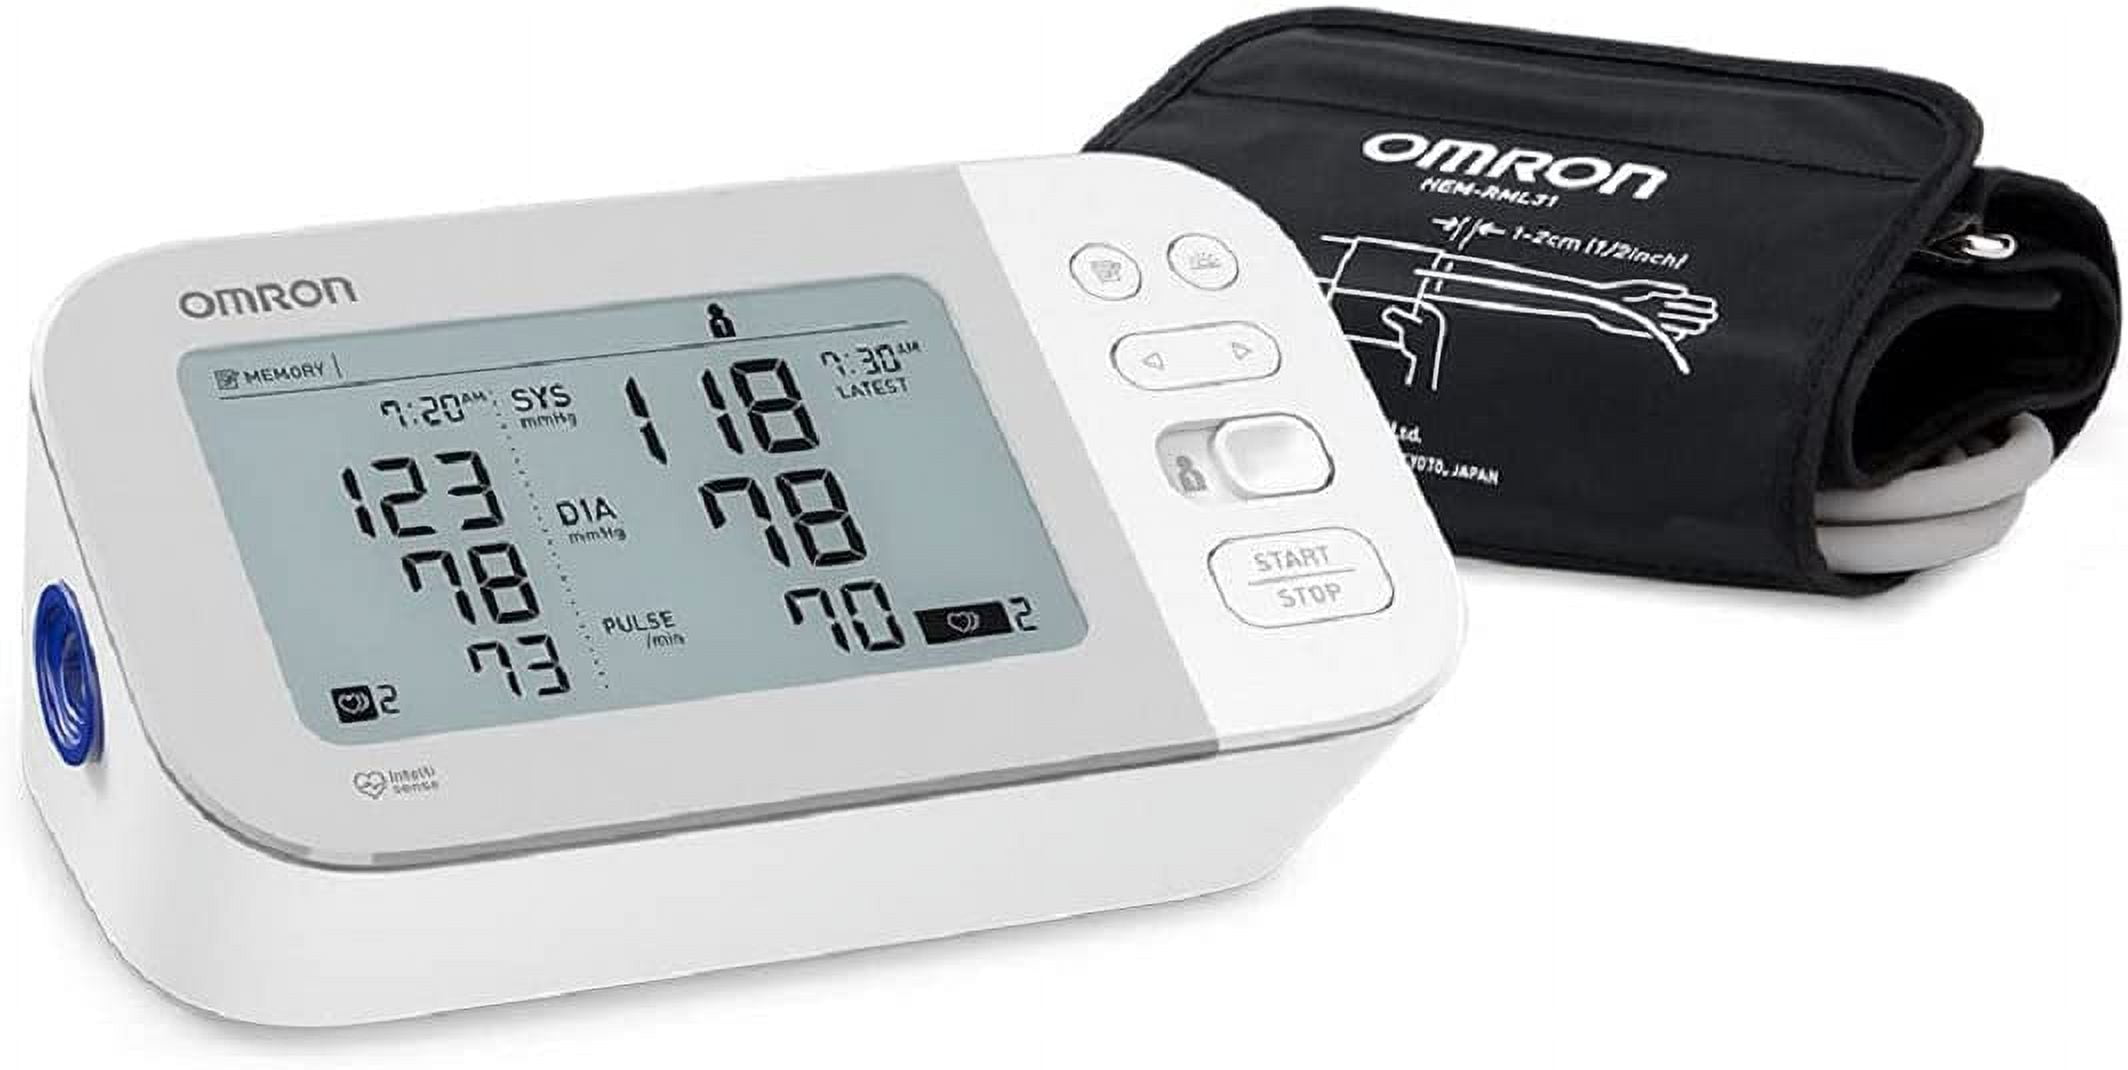 Omron blood pressure • Compare & find best price now »